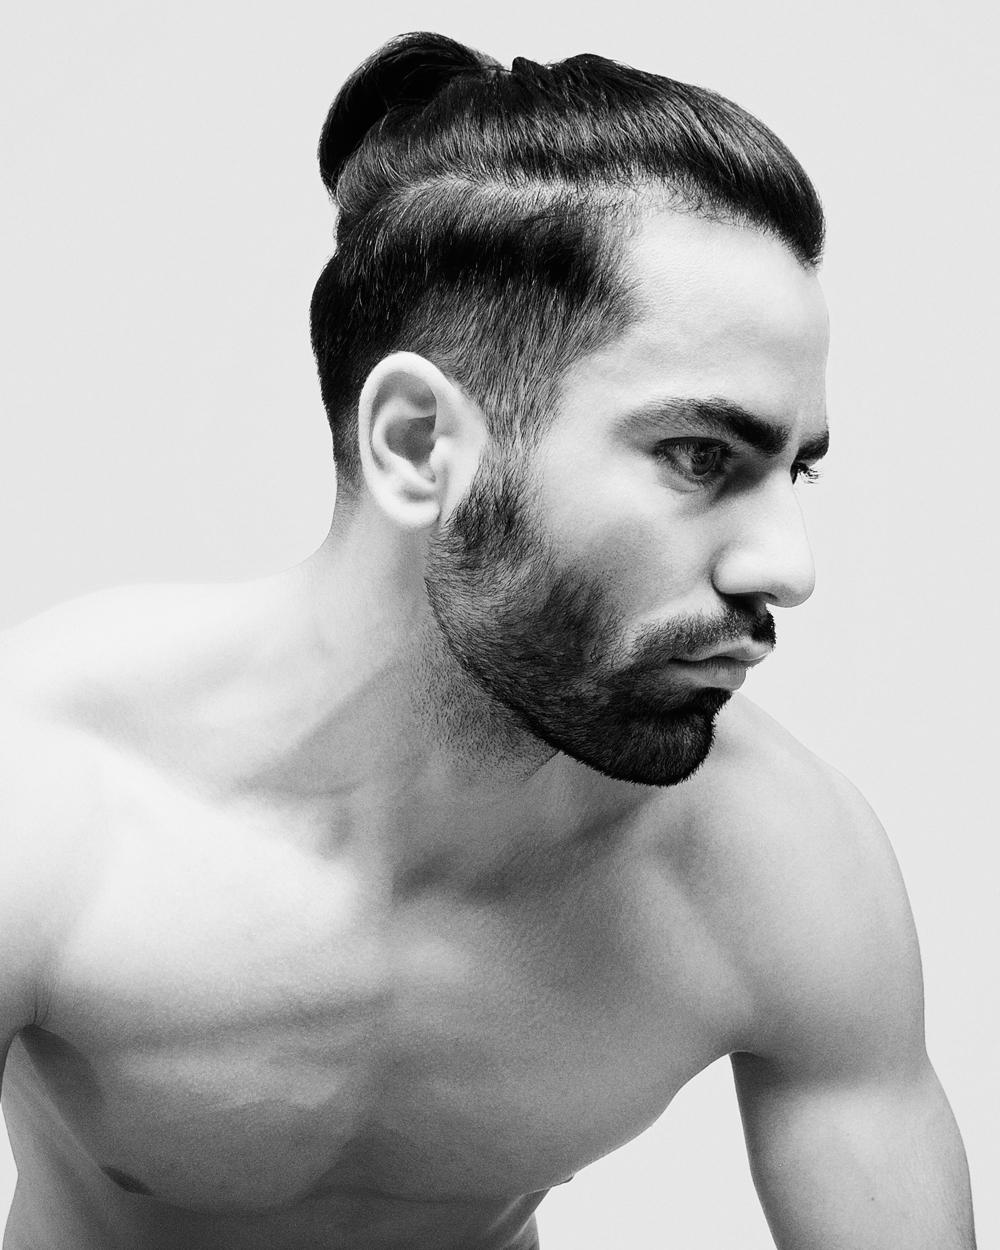 Robert Kirby London s men collection Chill short cut with pony tail and beard black and white stylish photo